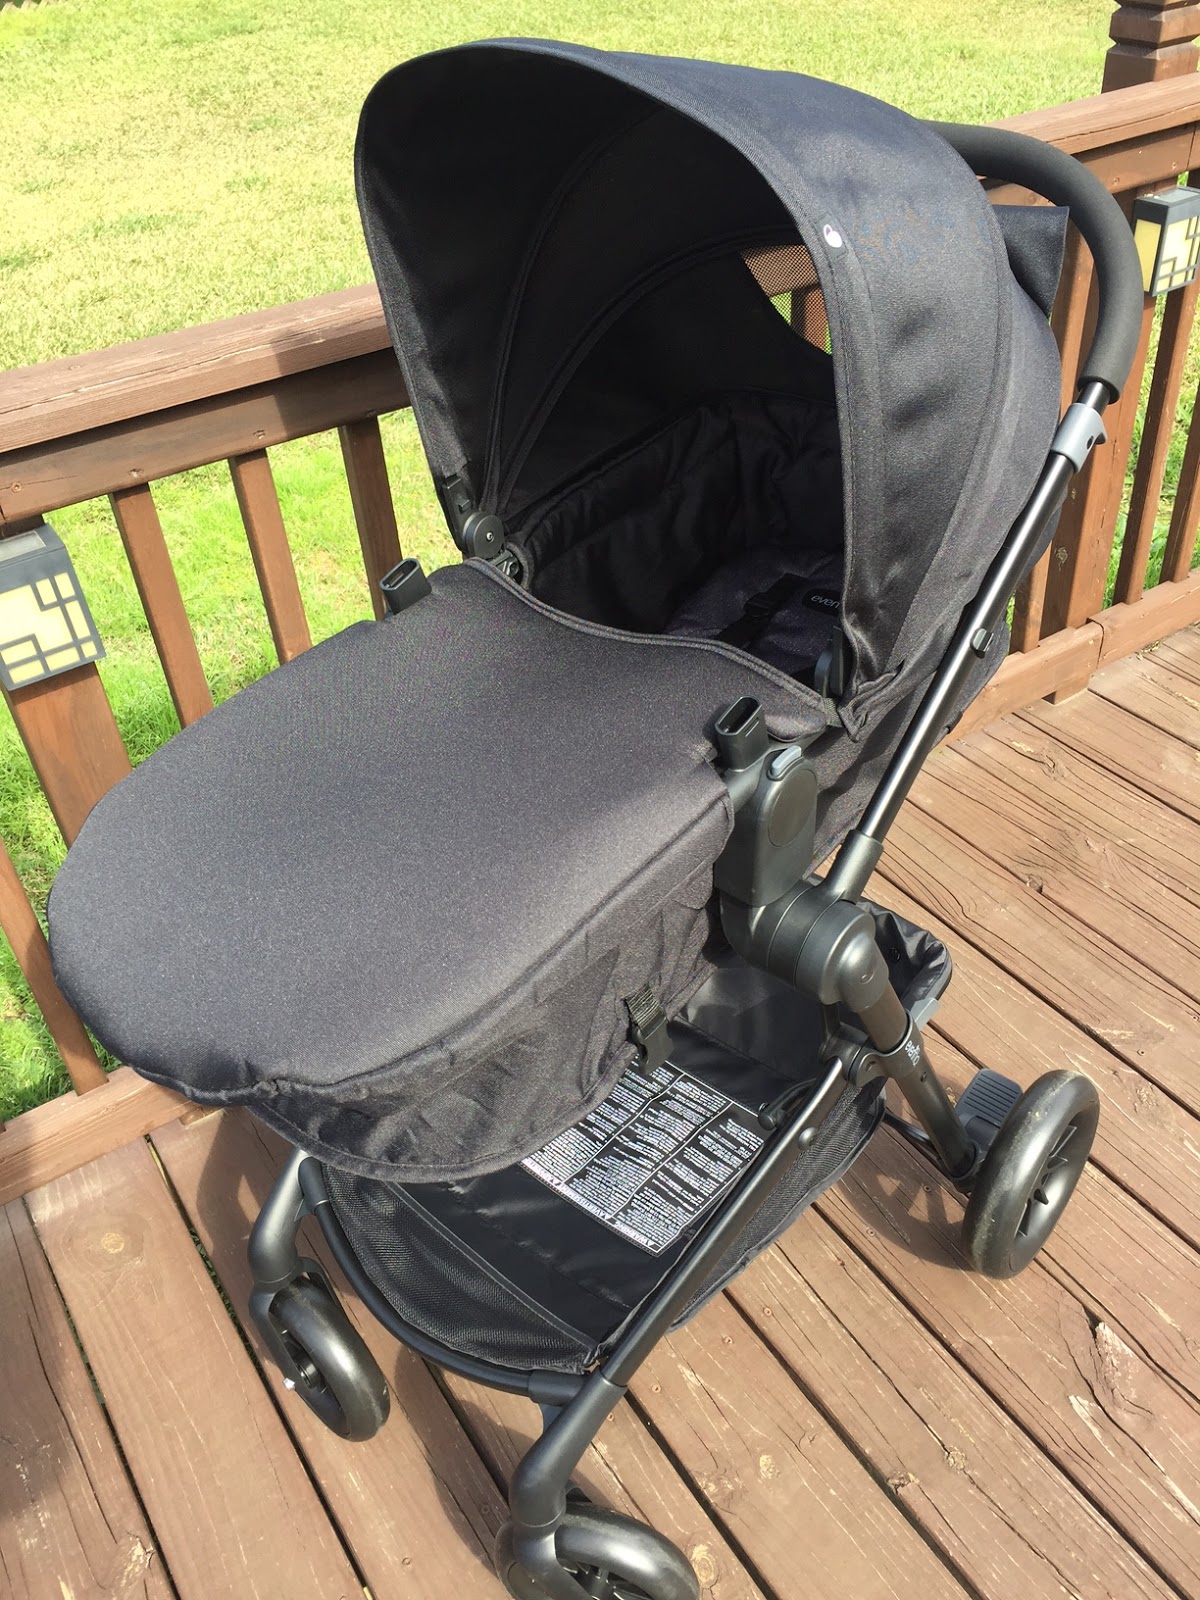 evenflo stroller without car seat